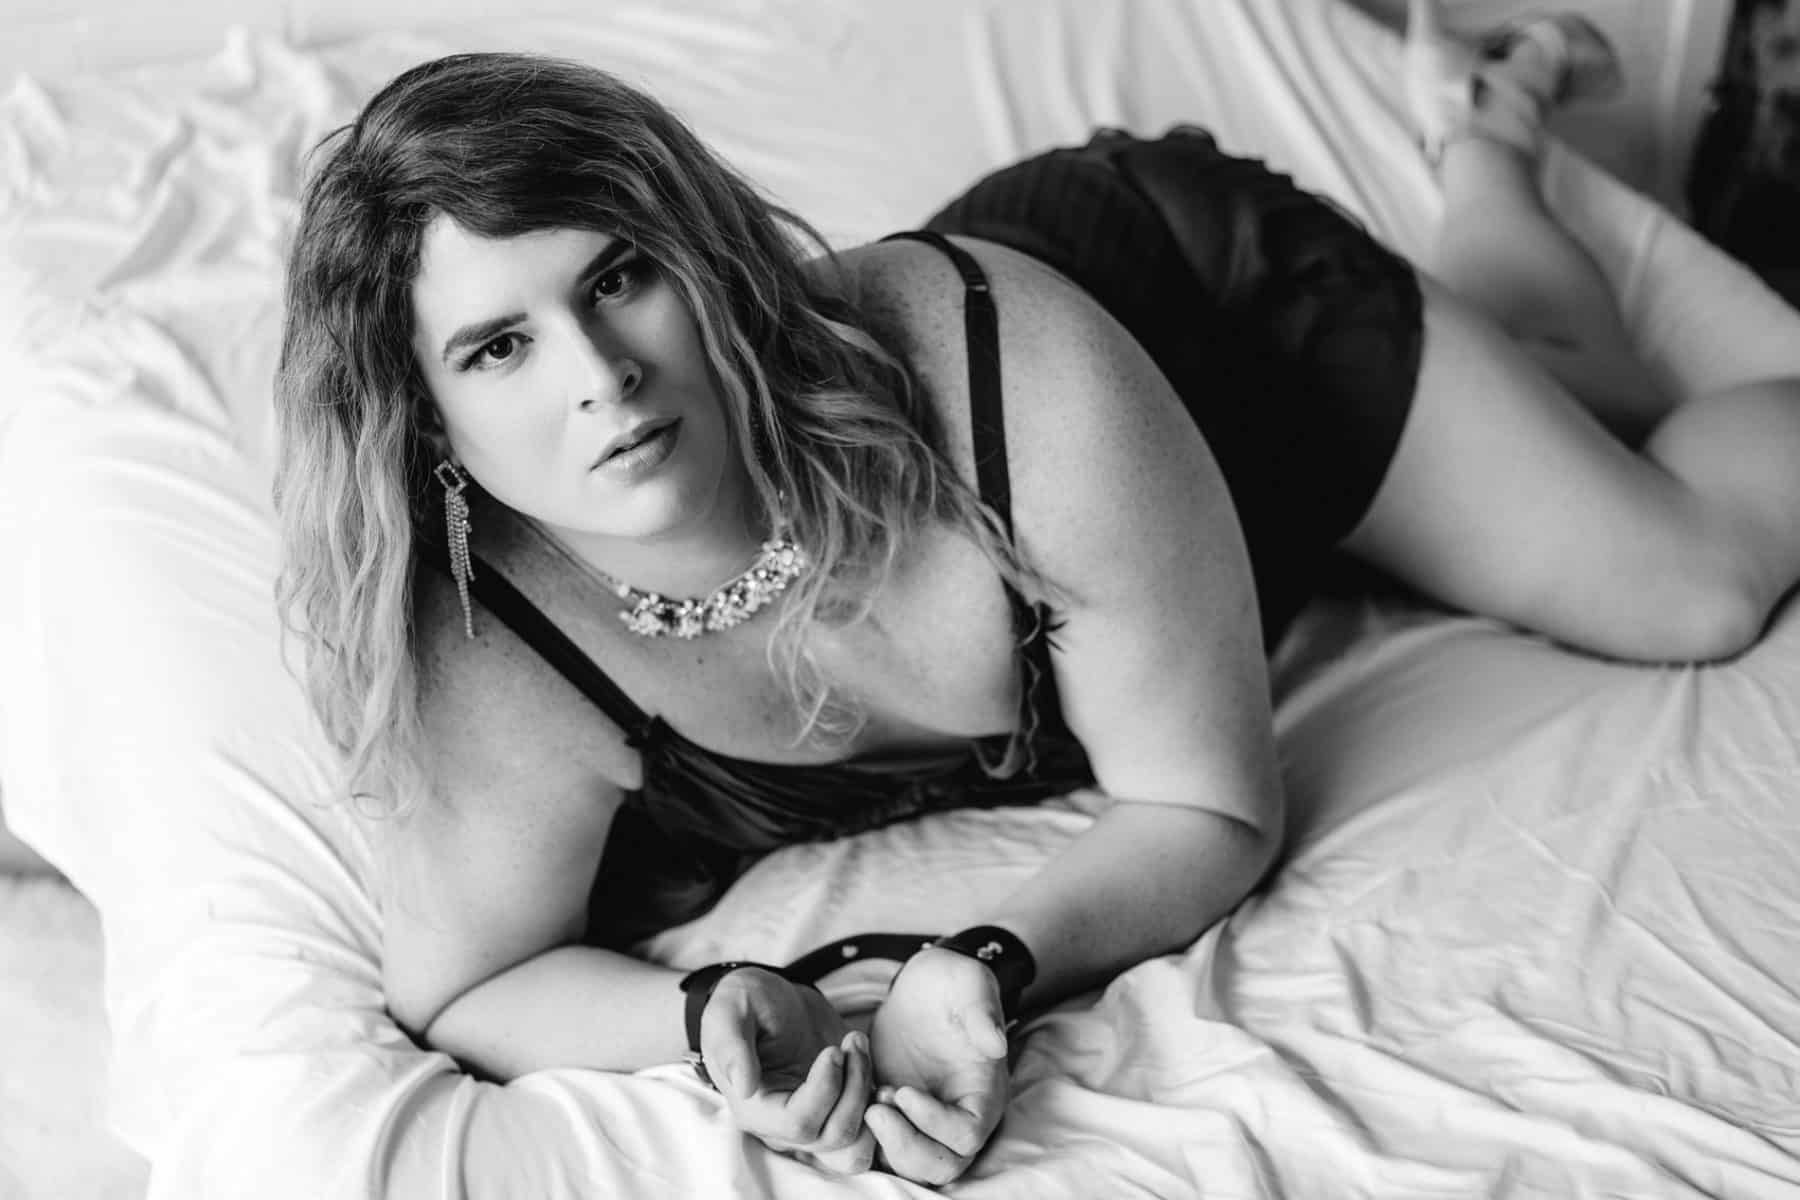 Celebrate your unique identity with our specialized gender affirming boudoir photography, capturing the essence of who you truly are. Take action today for stunning visuals!